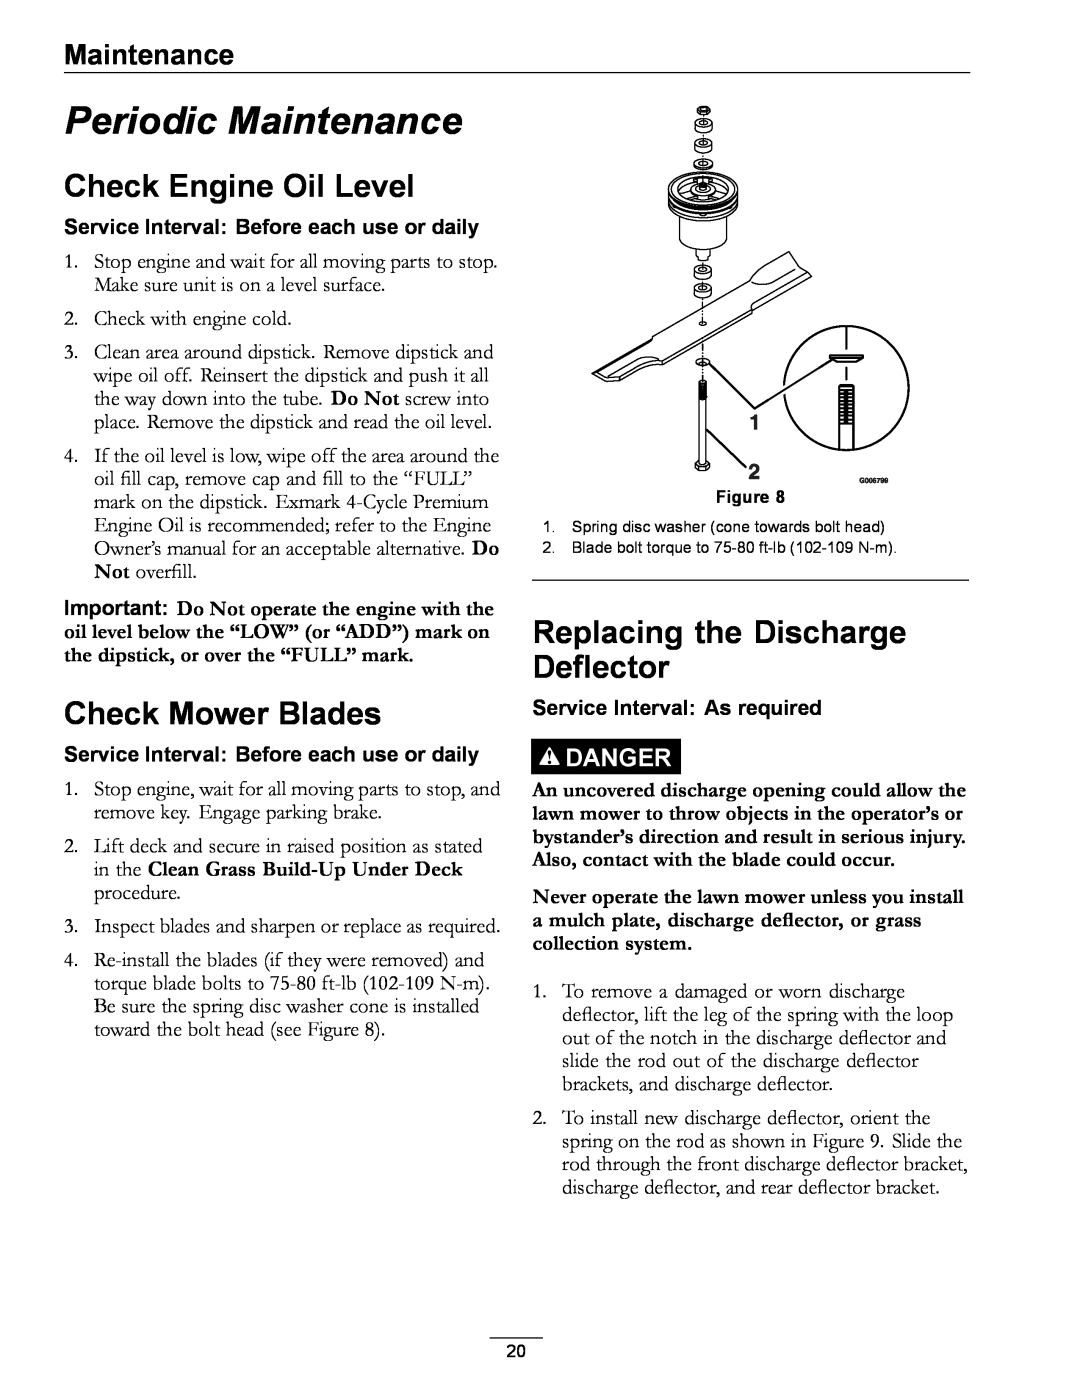 Exmark 4500-689 manual Periodic Maintenance, Check Engine Oil Level, Check Mower Blades, Replacing the Discharge Deflector 